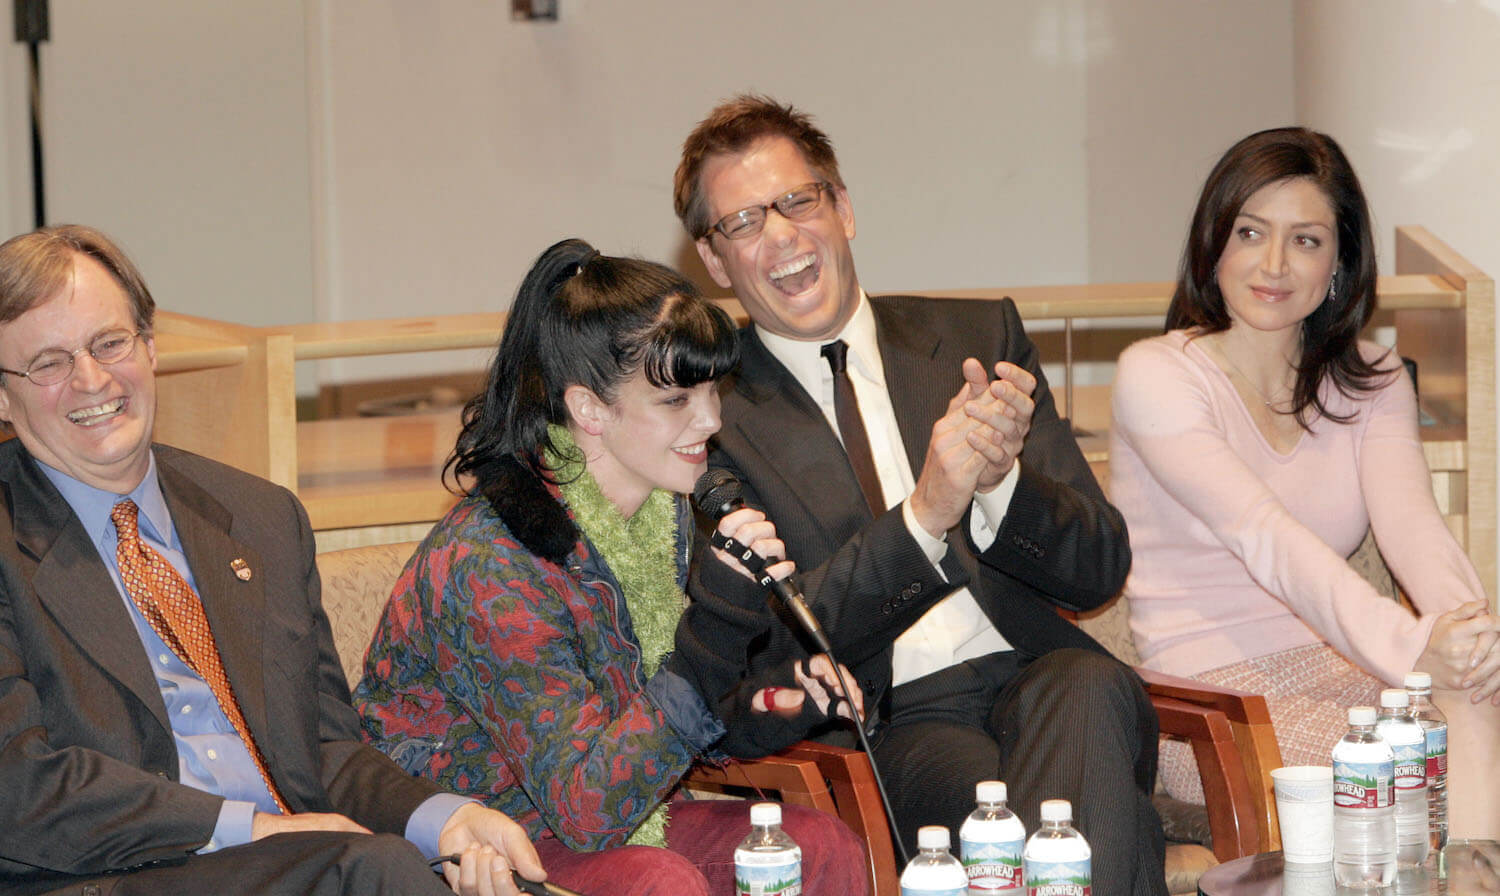 'NCIS' actors David McCallum, Pauley Perrette, Michael Weatherly, and Sasha Alexander laughing and talking together at a panel